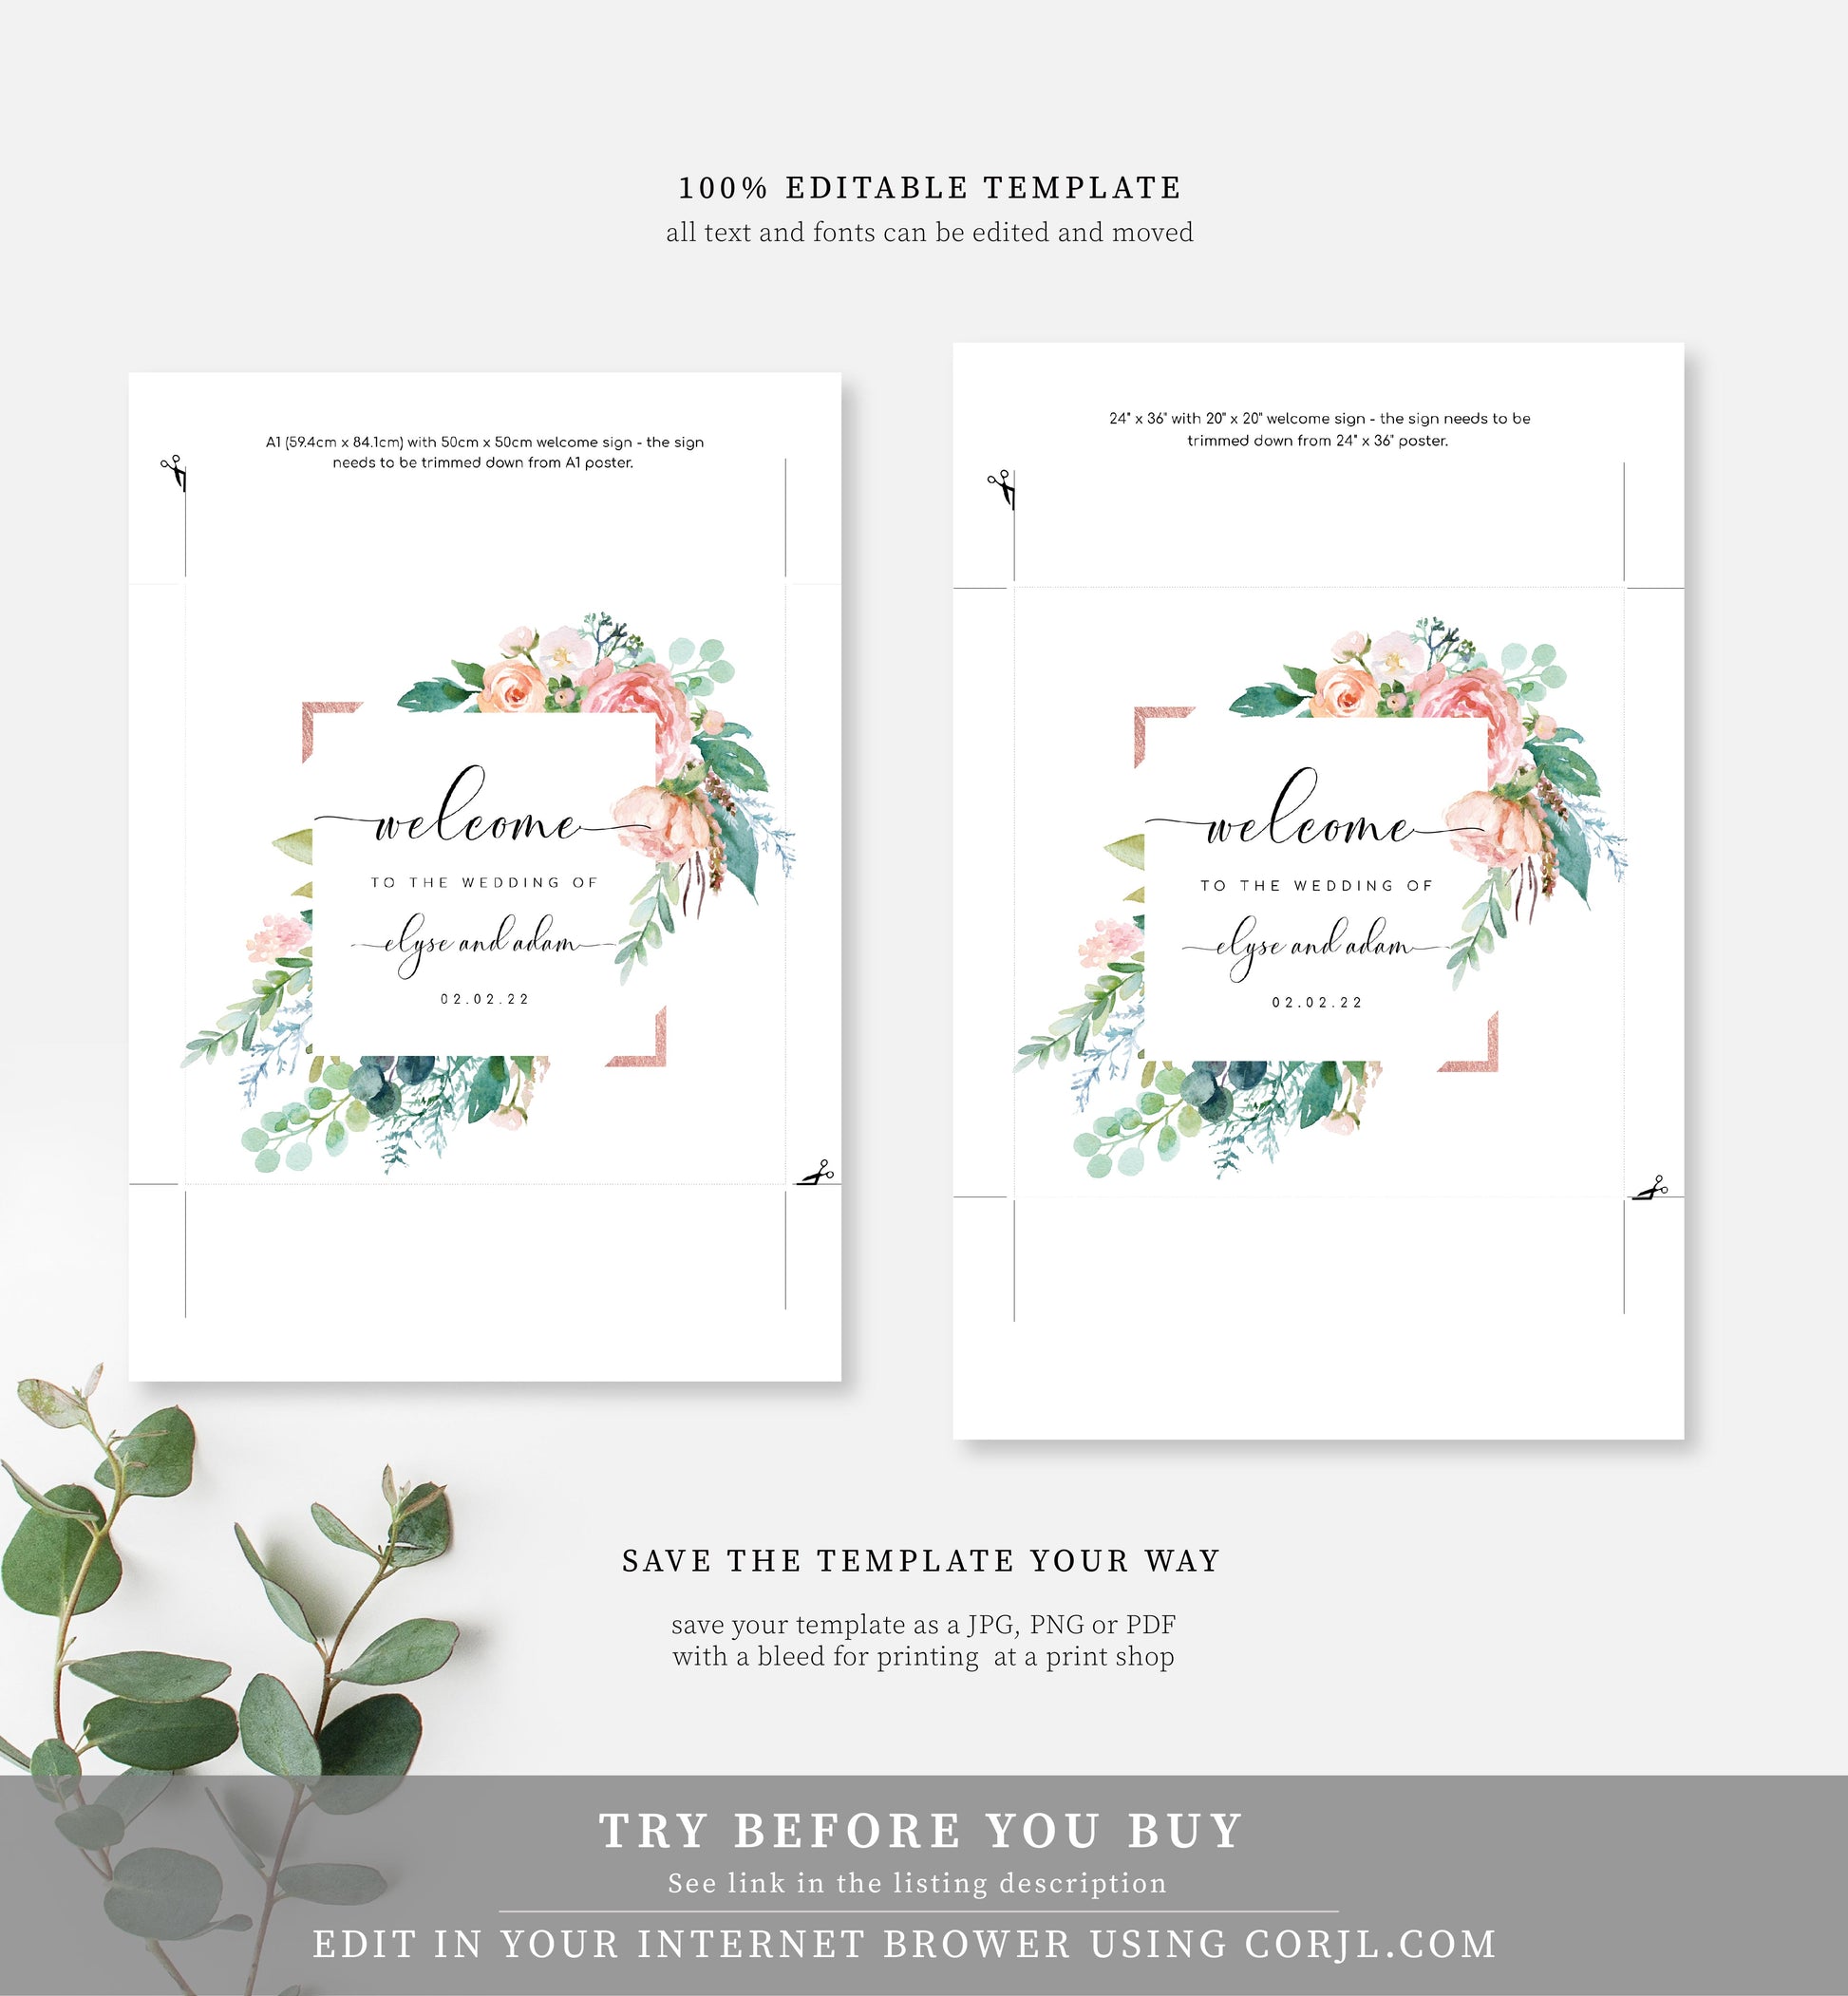 Afternoon Blooms | Printable Square Welcome Sign Template - Black Bow Studio